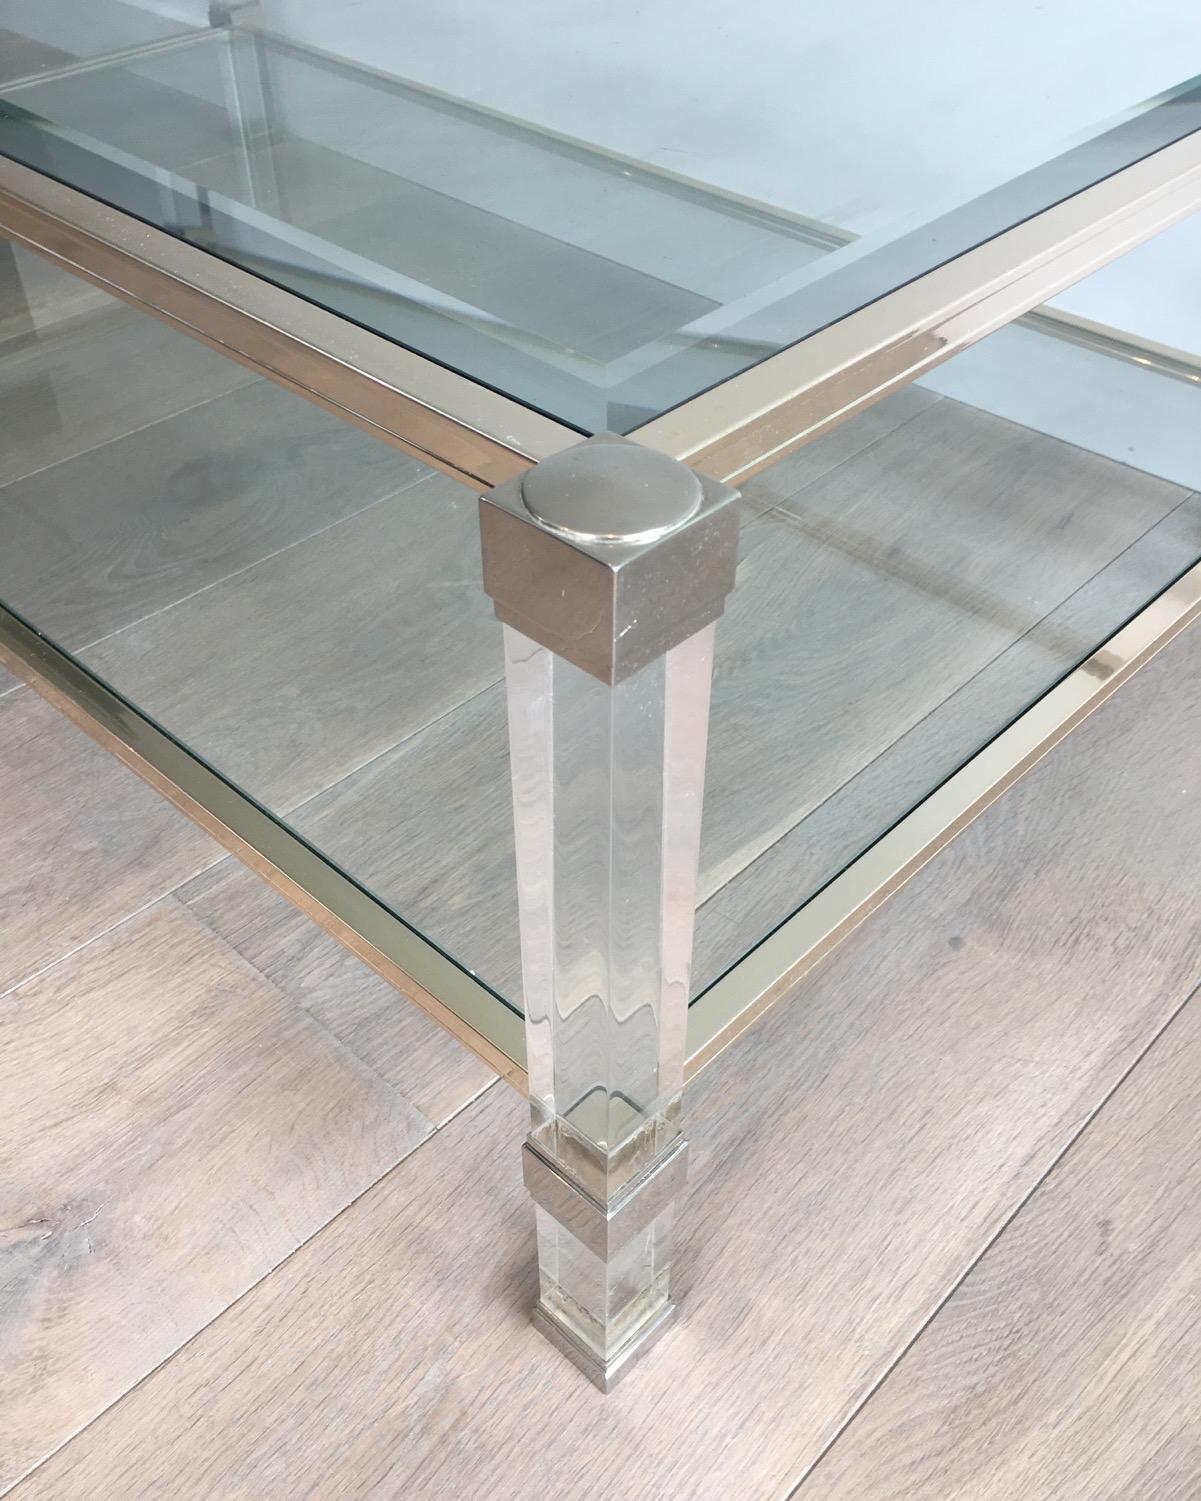 Large Lucite and Chrome Coffee Table, French by Pierre Vandel, circa 1970 In Fair Condition For Sale In Marcq-en-Barœul, Hauts-de-France